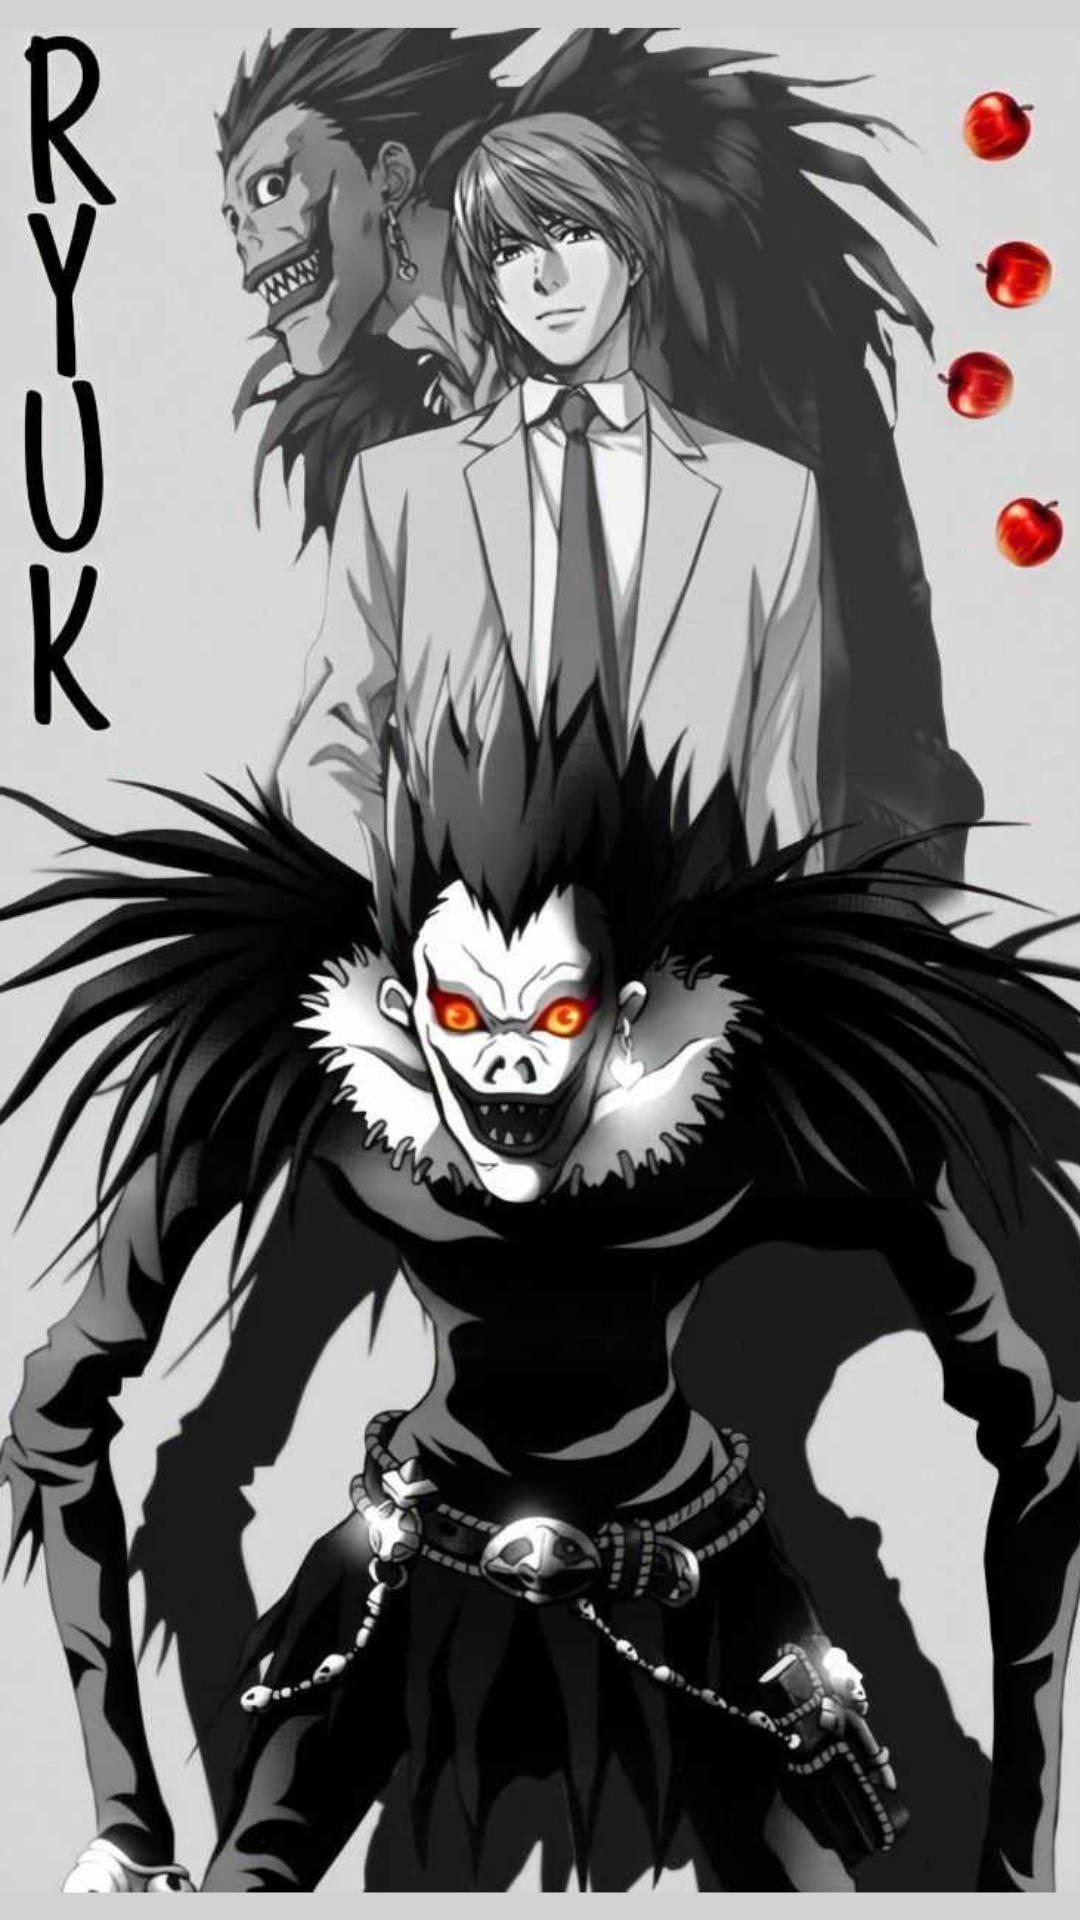 Download Poster Ryuk And Light Death Note Iphone Wallpaper 